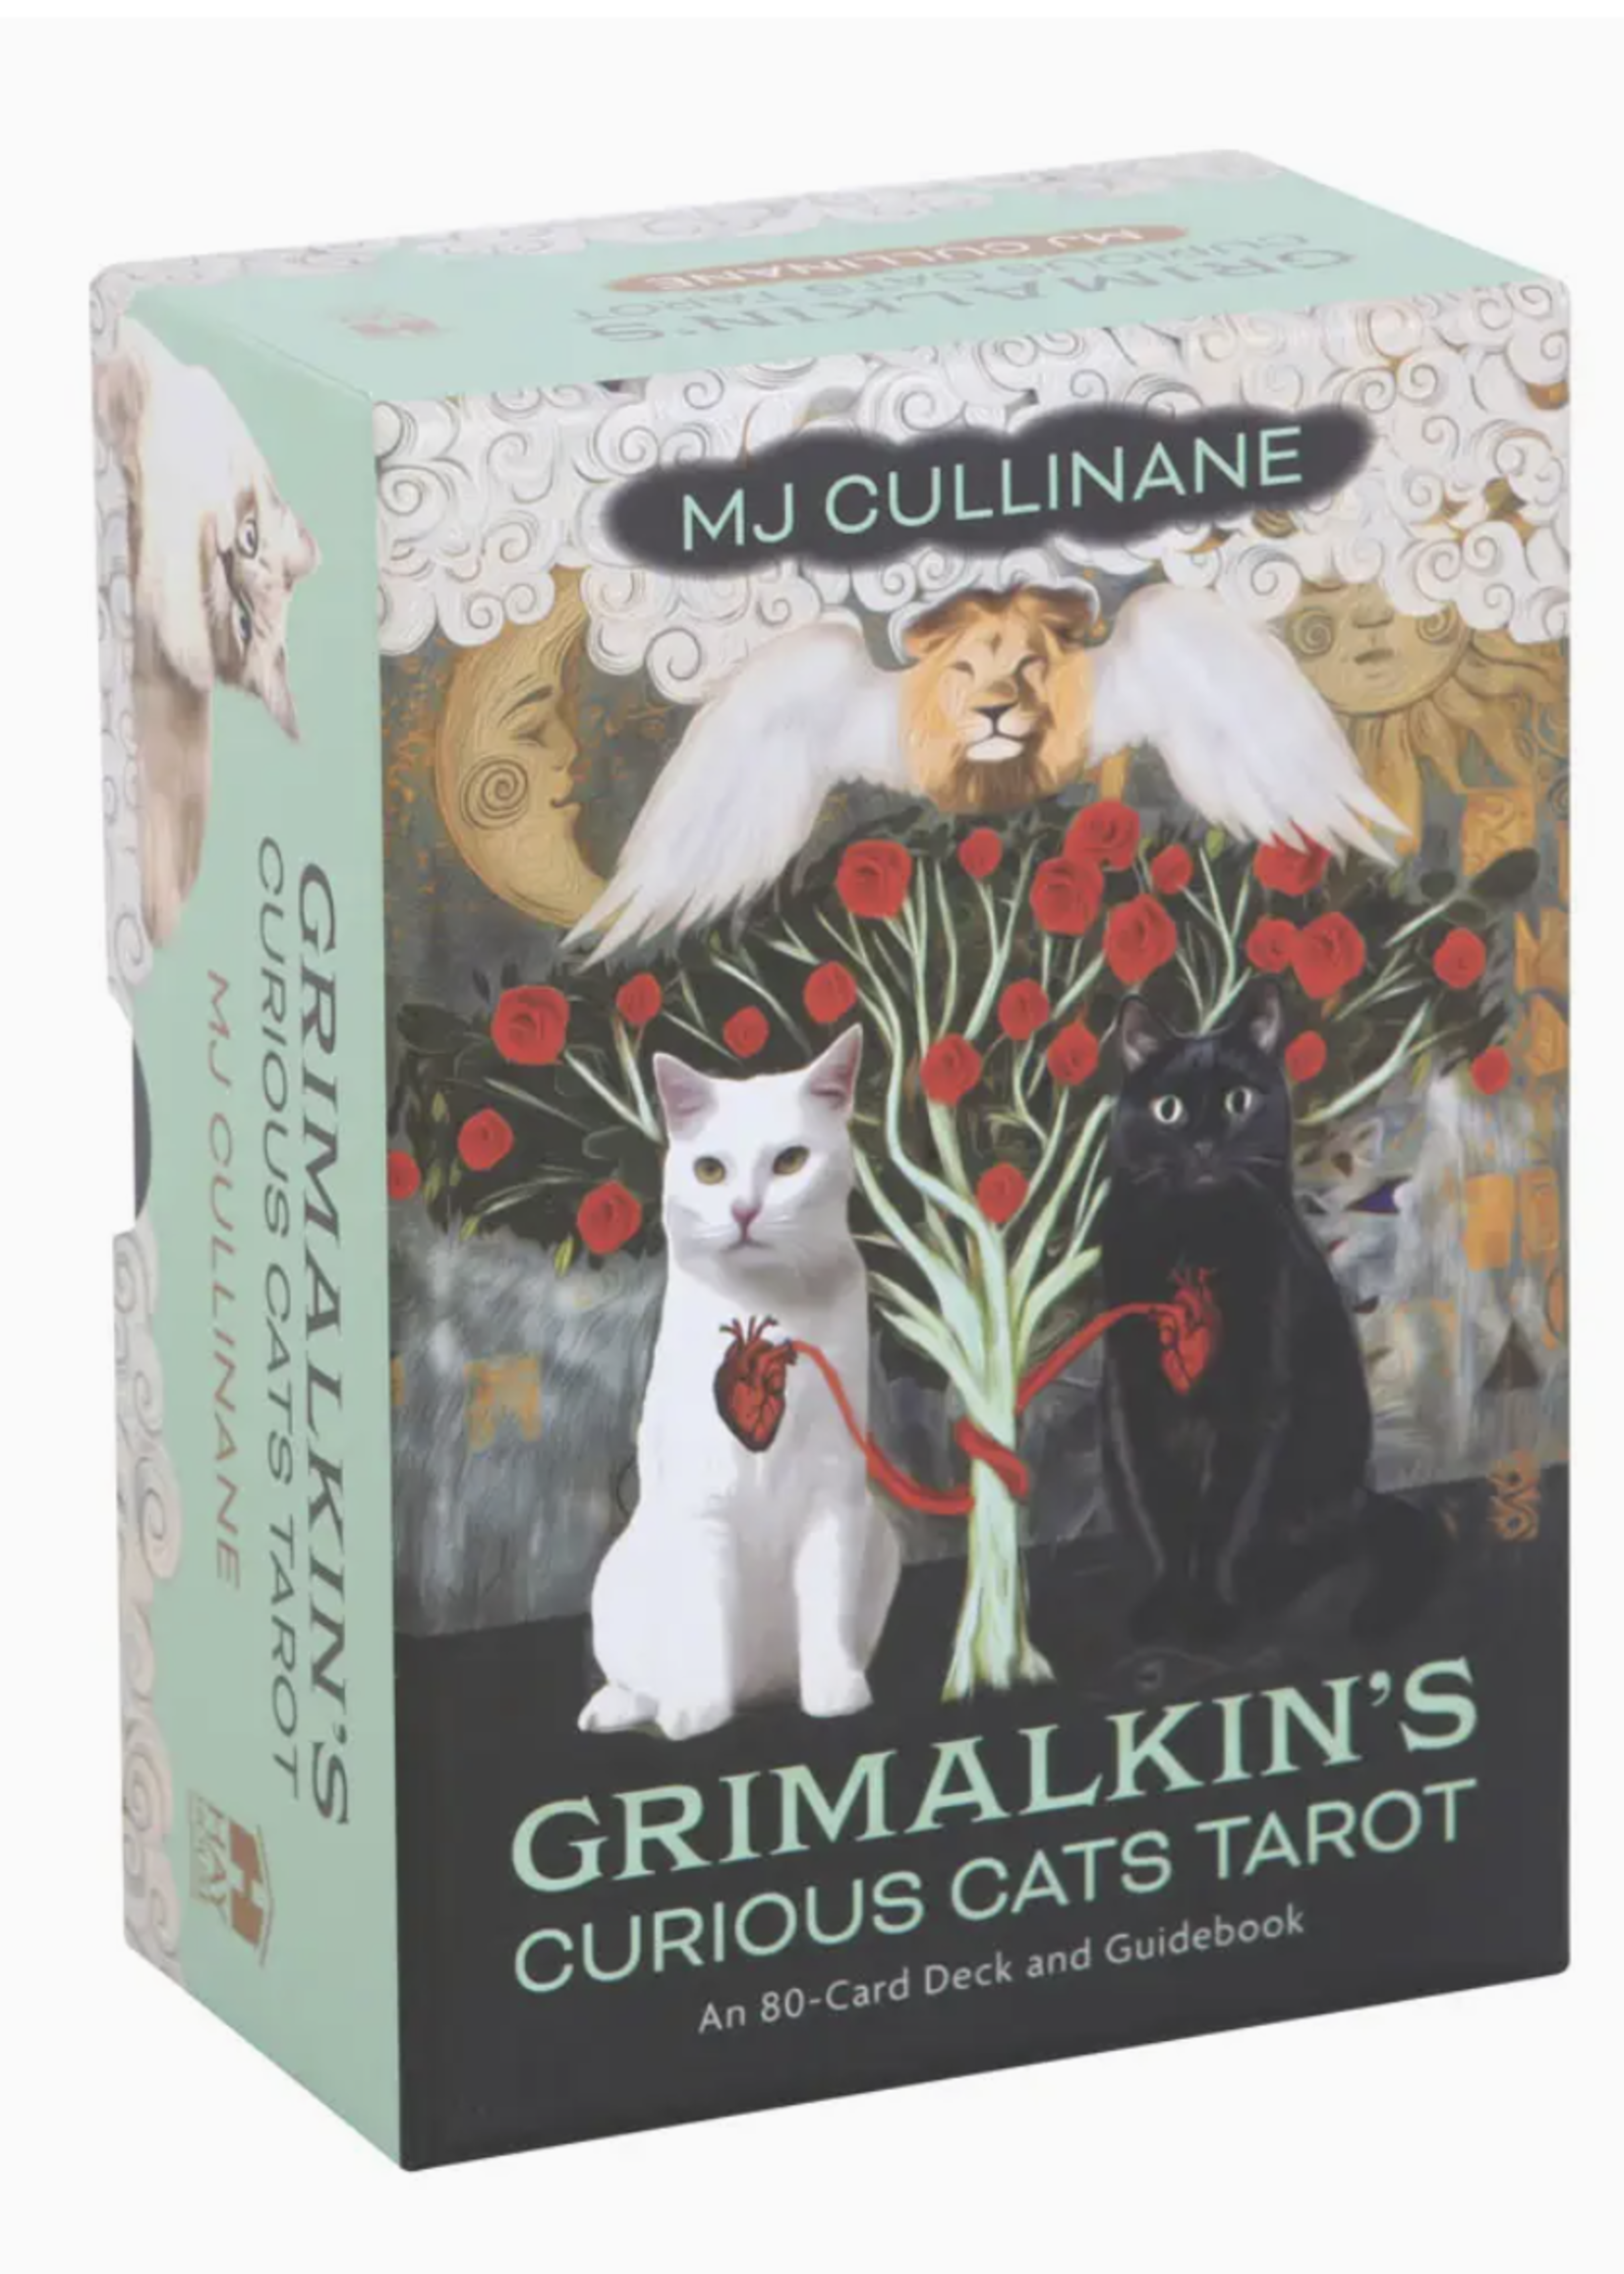 Something Different Wholesale Grimalkin's Curious Cats Tarot Cards